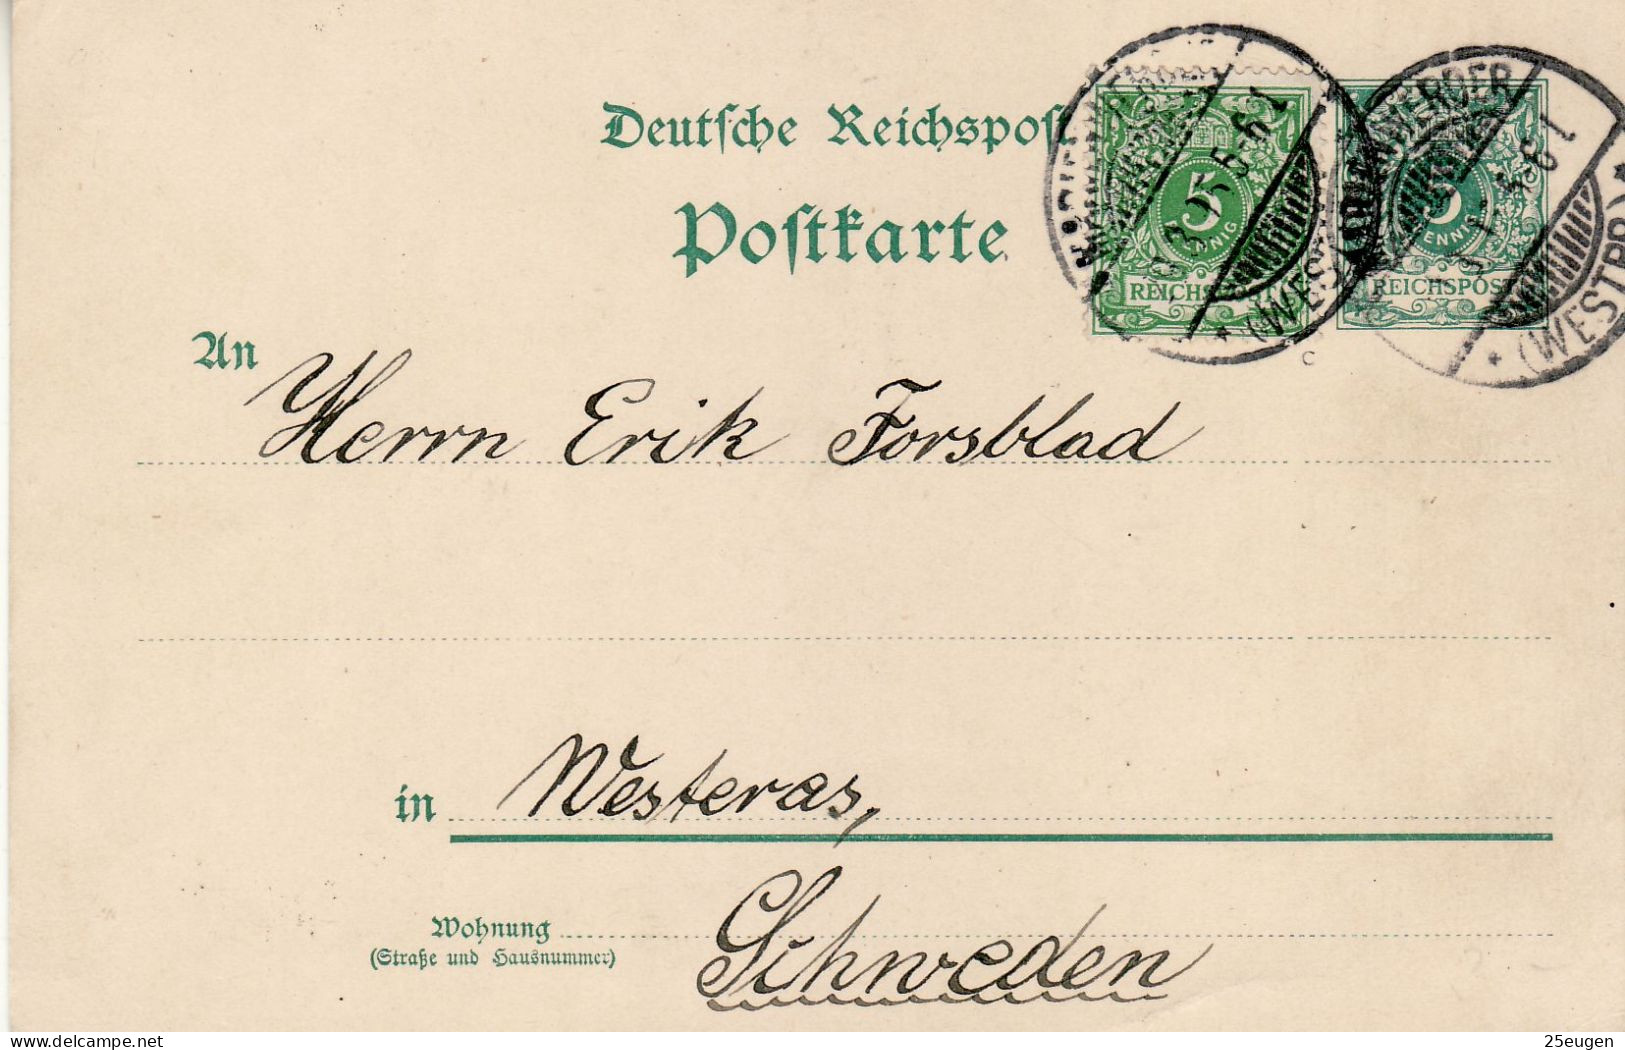 GERMANY EMPIRE 1895 POSTCARD  MiNr P 36 I SENT FROM MARIENWERDER /KWIDZYŃ/ TO WESTERAS - Covers & Documents